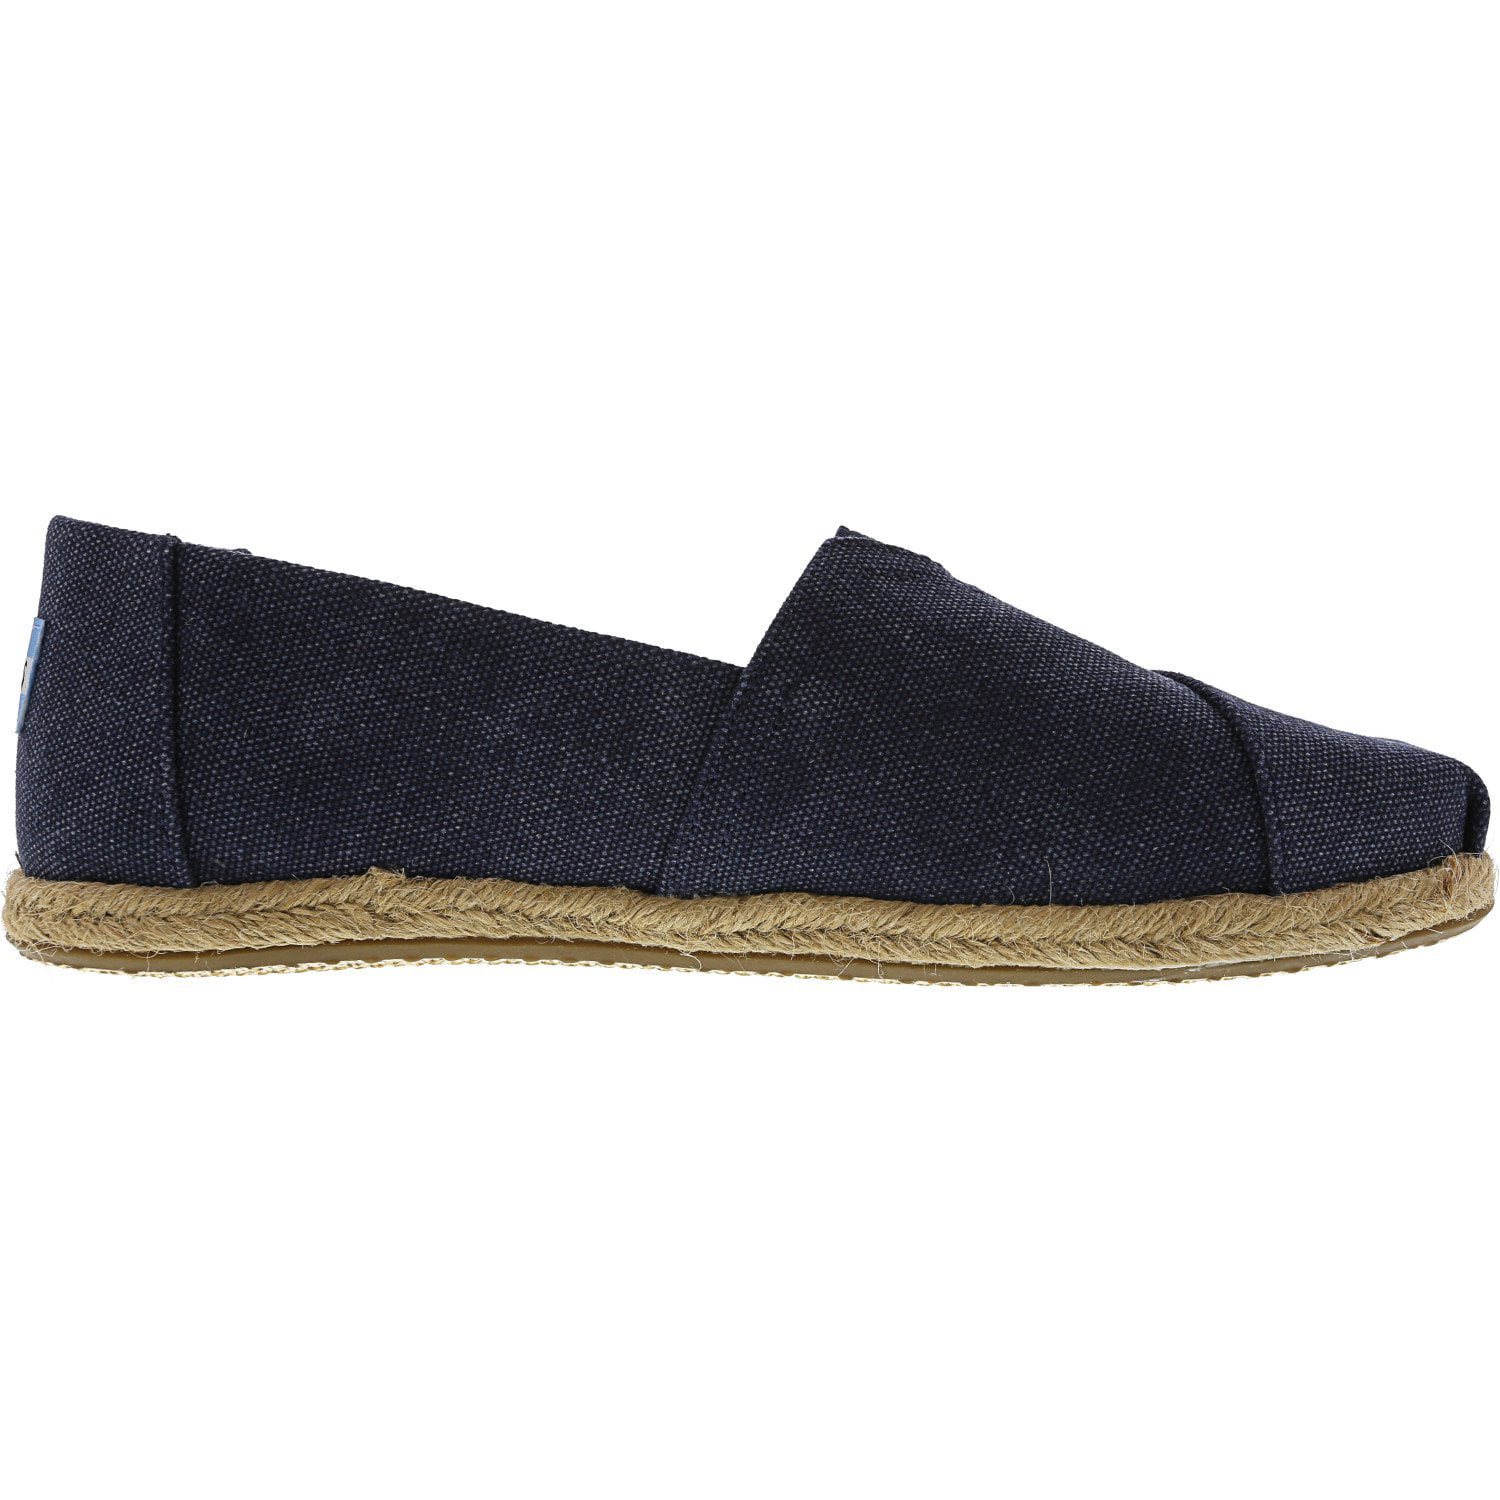 Toms Women's Classic Washed Canvas Rope Sole Navy Slip-On Shoes - 7.5M ...